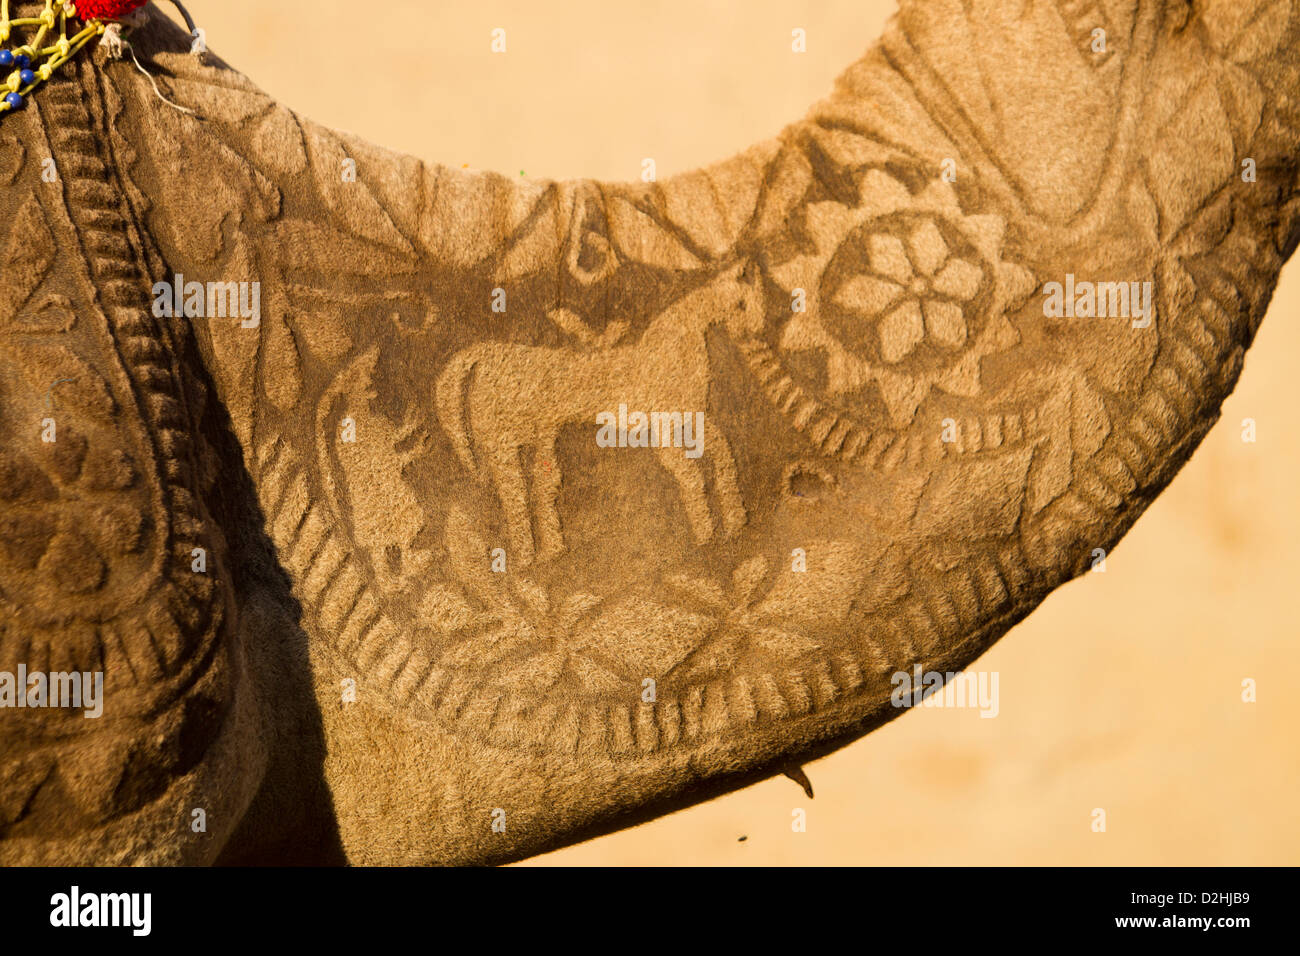 Dromedary Camel (Camelus dromedarius). The male Gajraj is richly decorated with patterns clipped into its fur. As a dancing came Stock Photo